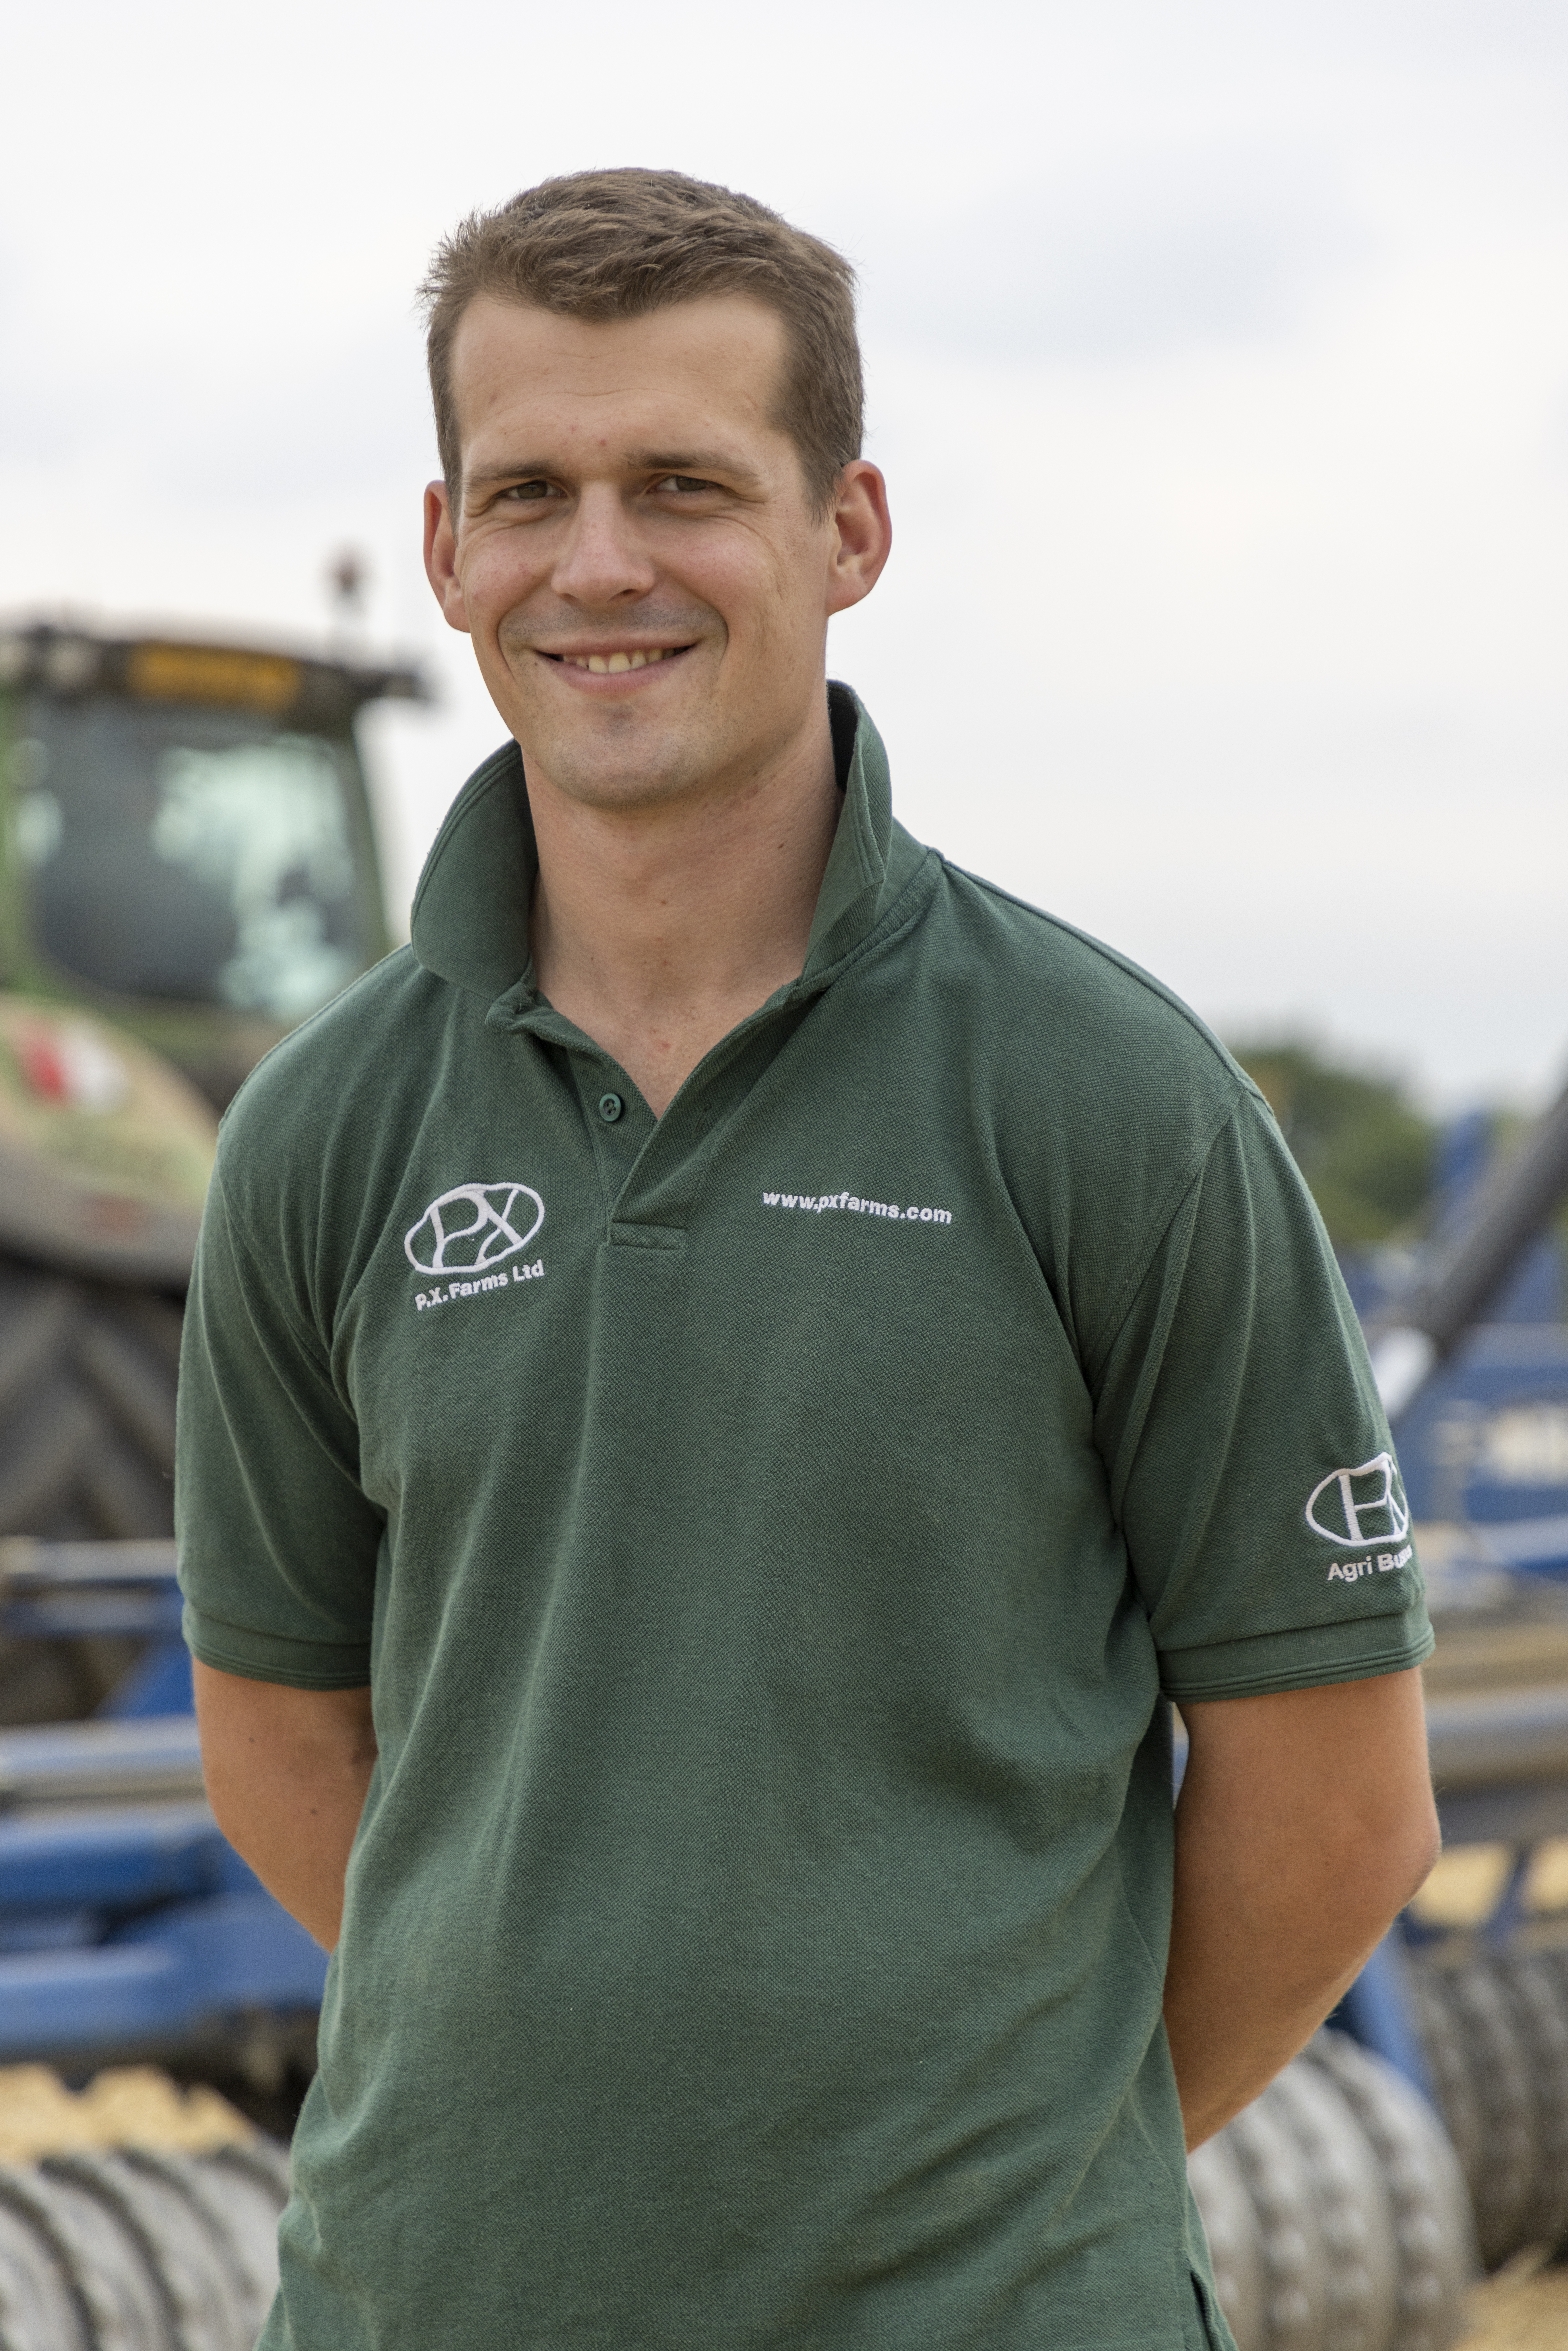 Picture of Tom Eve standing for a photo with his hands behind his back and a tractor in the background